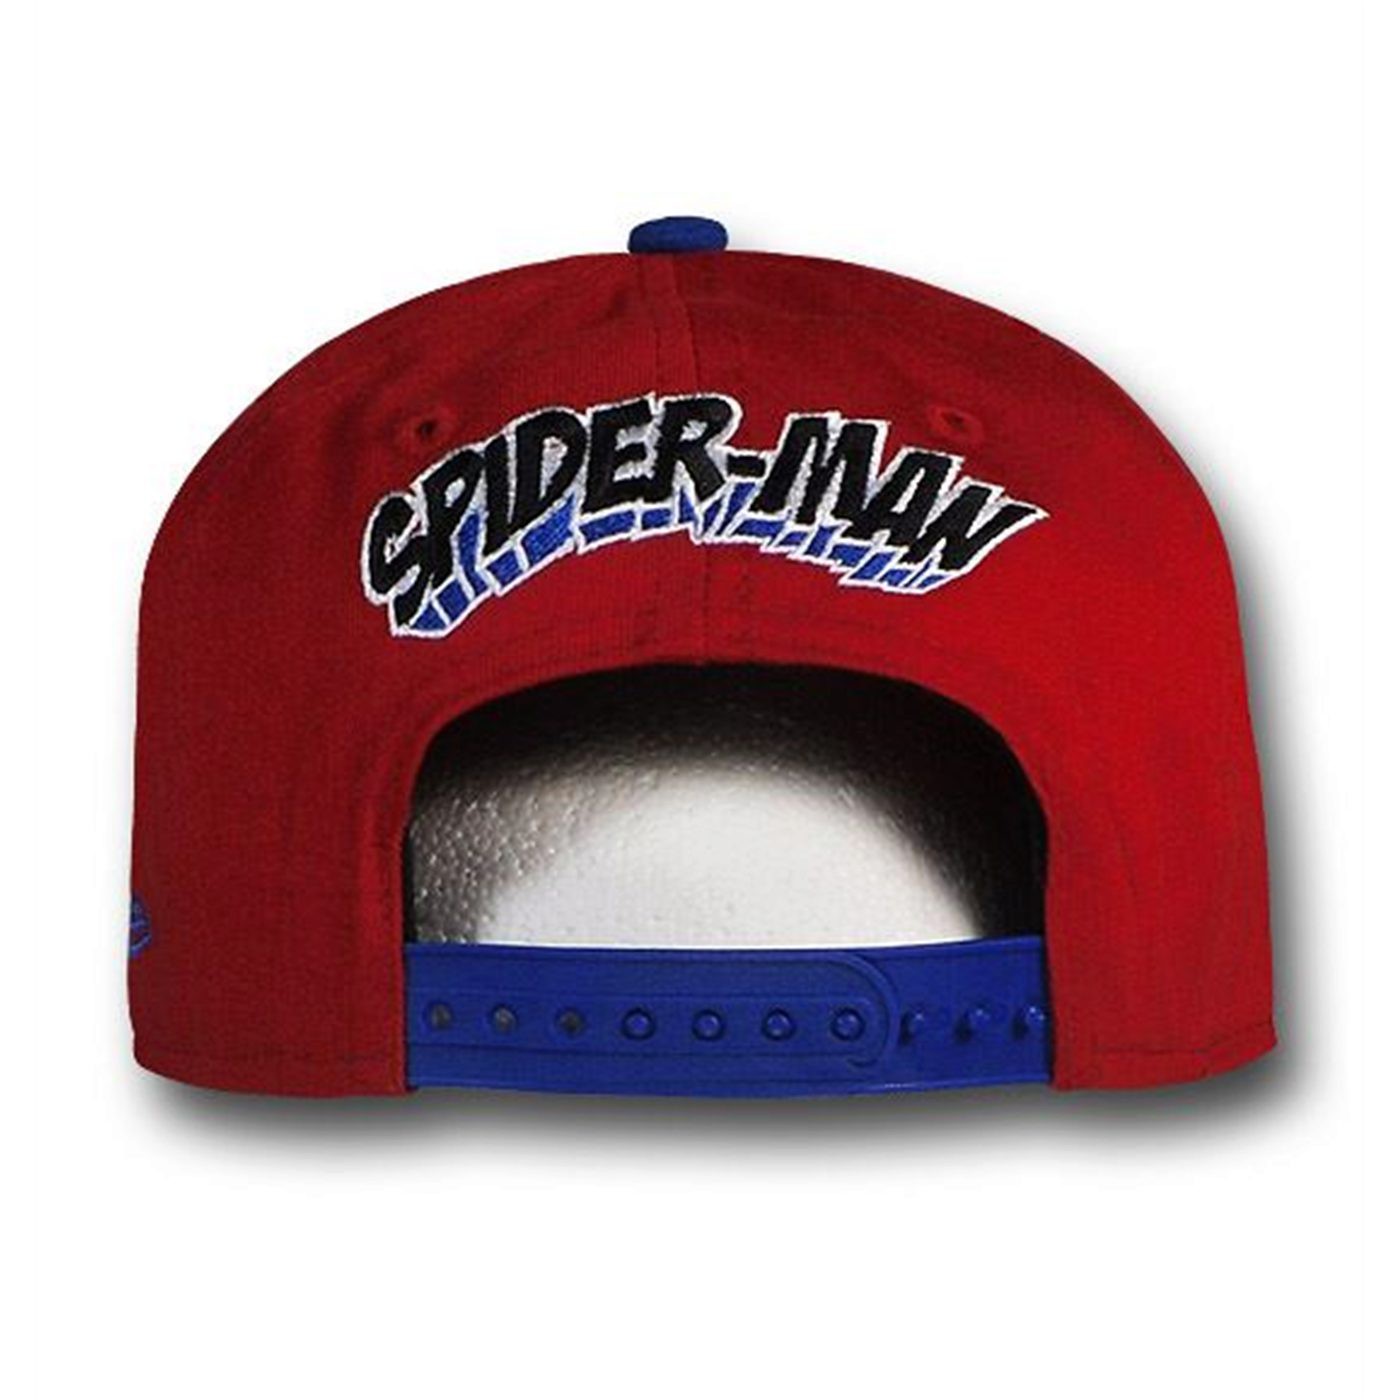 Spiderman Kids Action Arch 9Fifty Snapback Cap